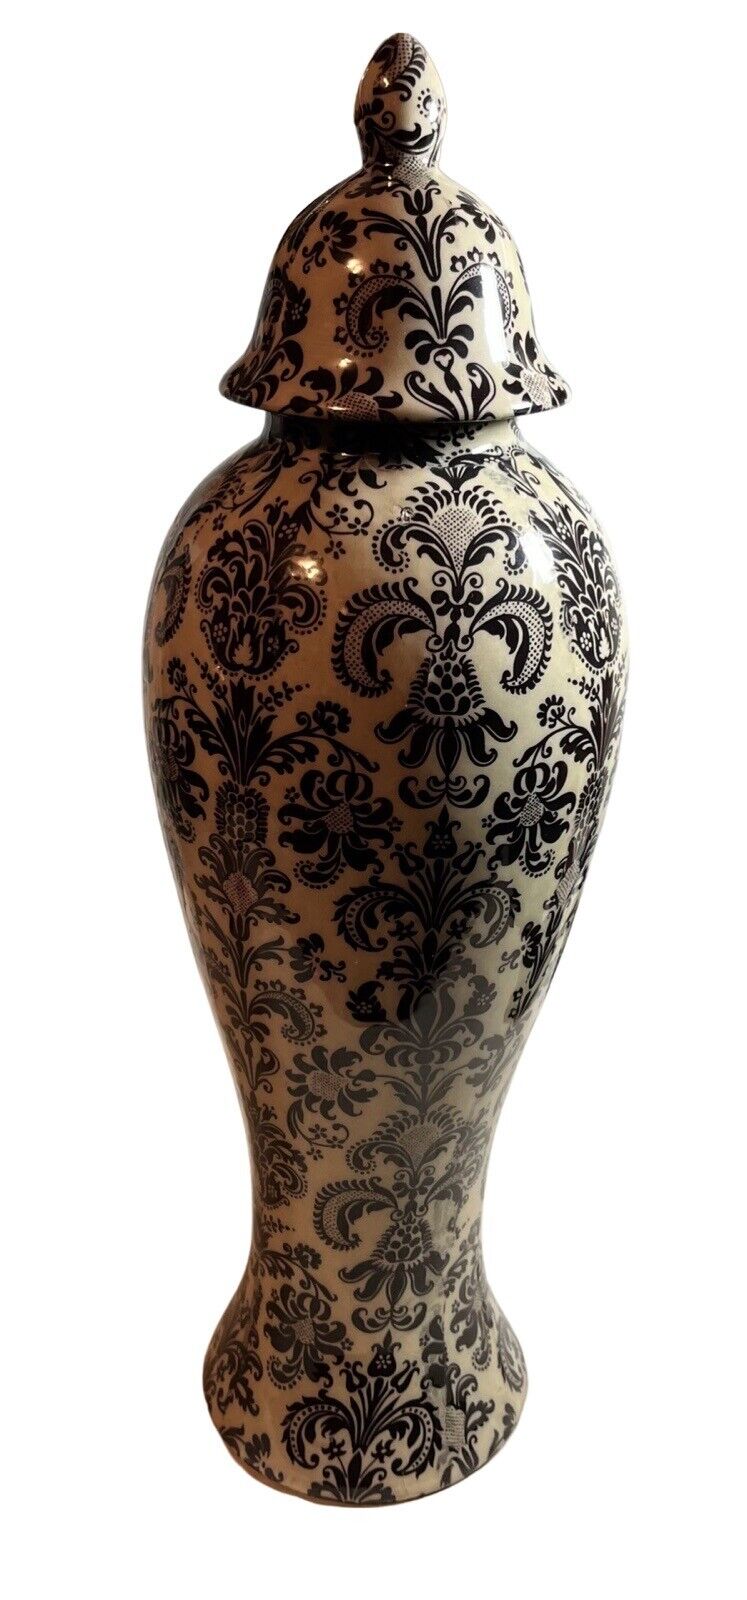 Beautiful Edwardian Decorative Urn Black And White Home Decor 20 Inches Tall